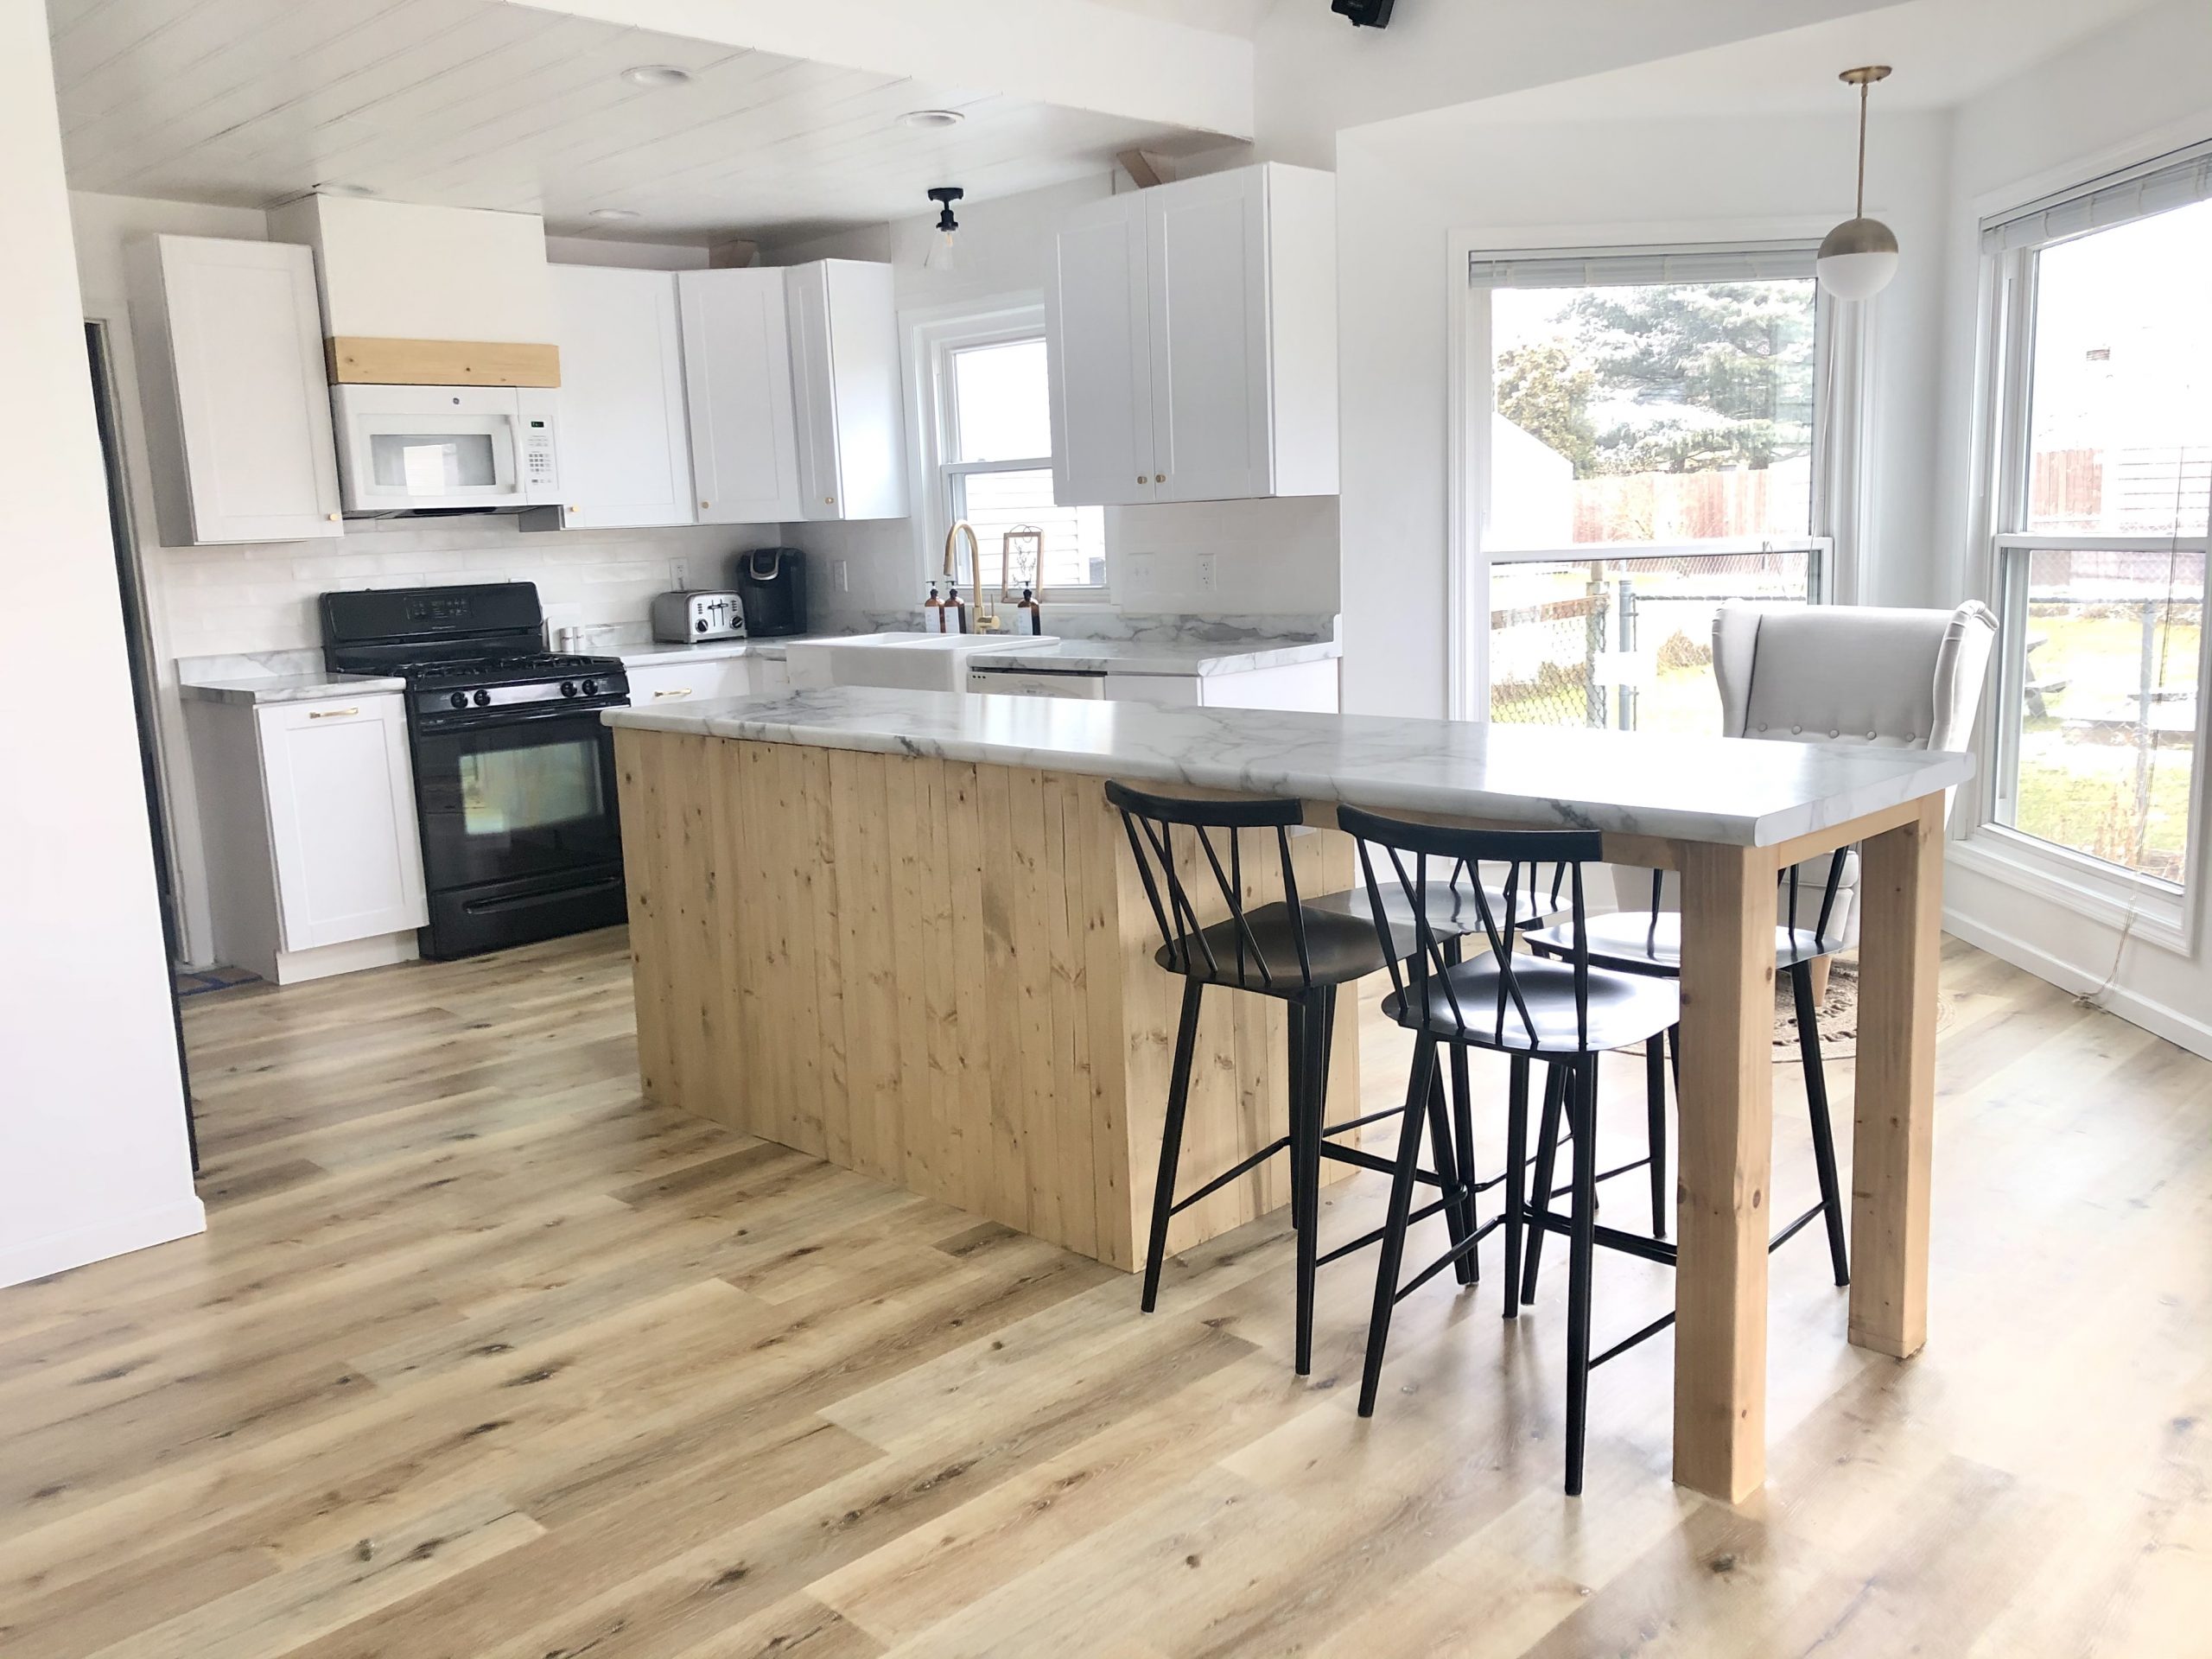 Modern Farmhouse Kitchen Island With Seating: New Blog Post